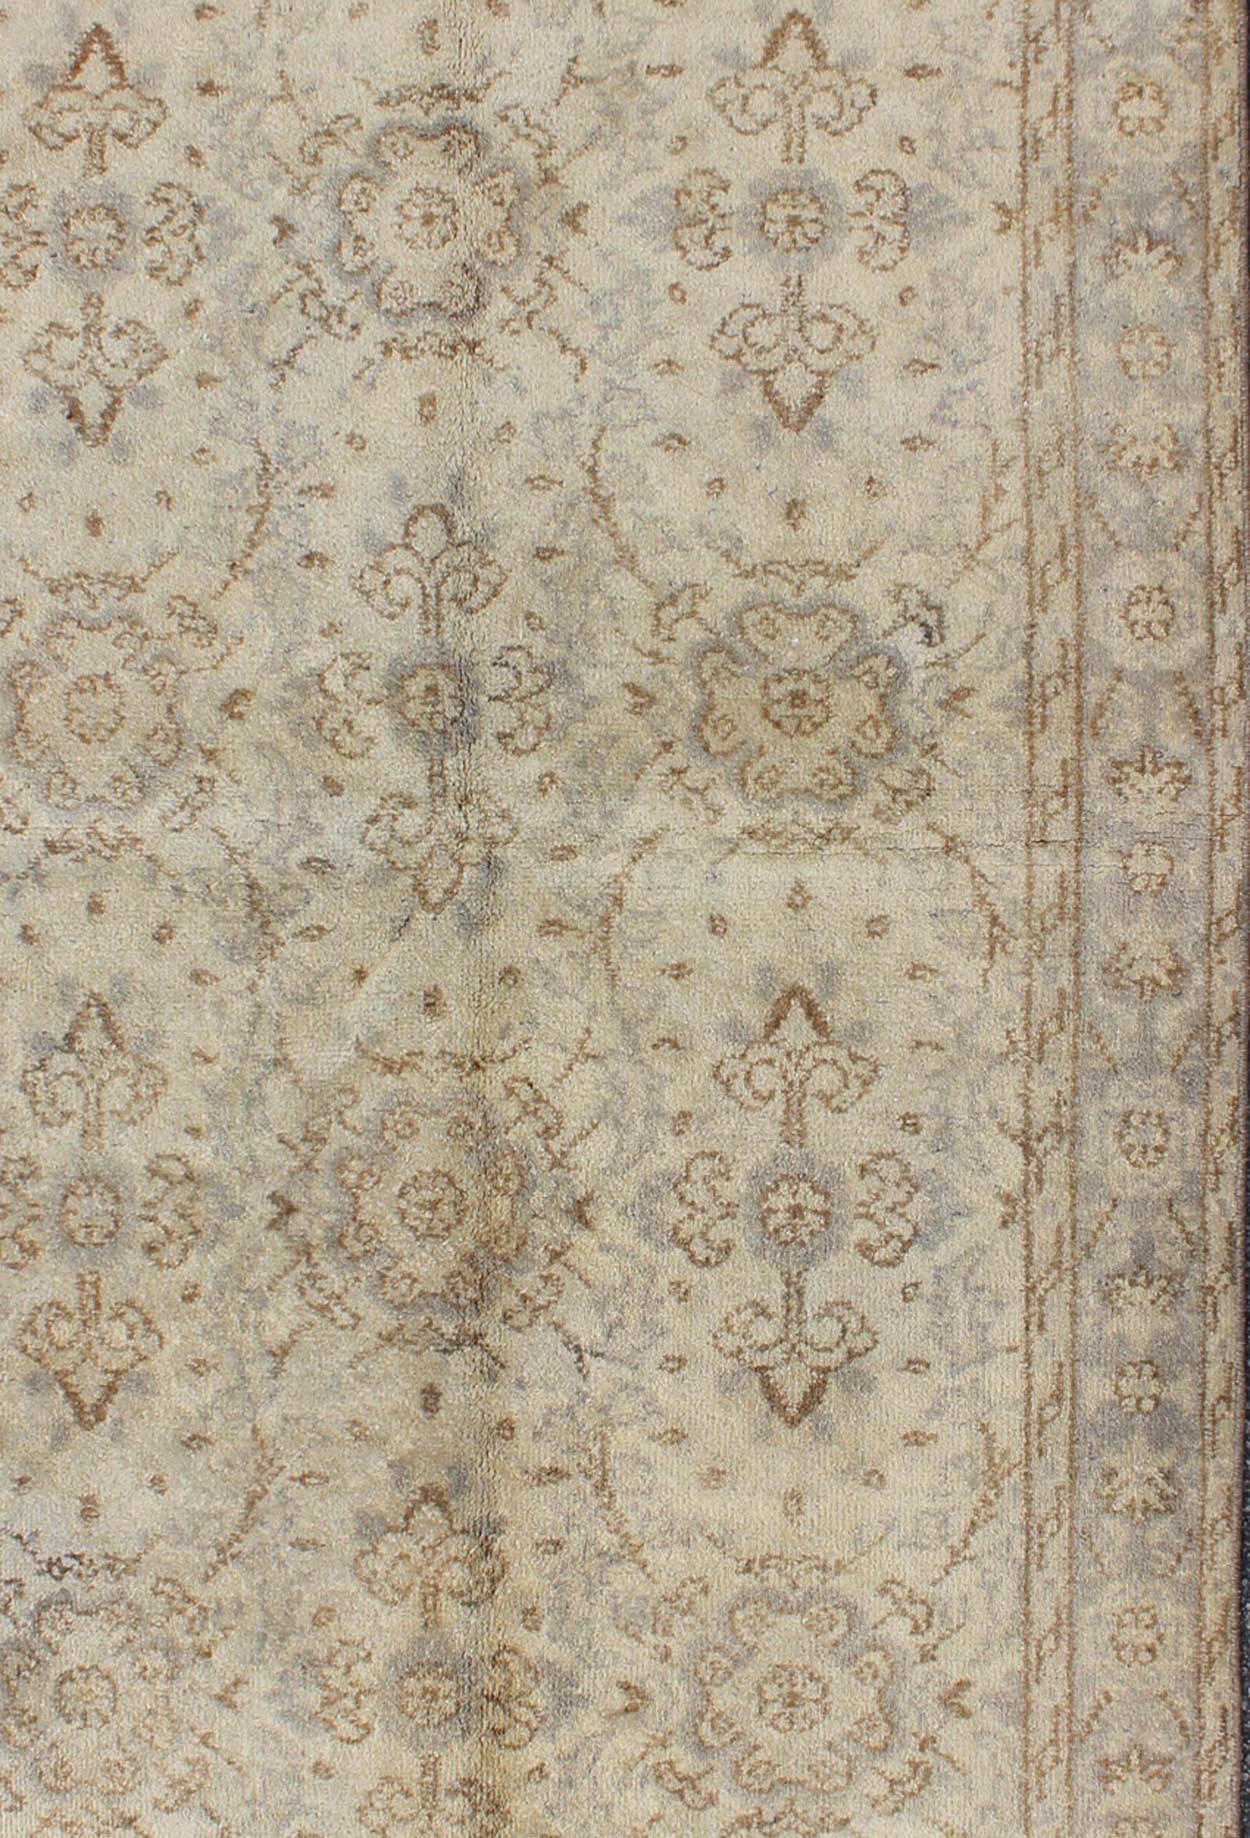 Vintage Turkish Oushak Rug with All-Over Floral Design in Ivory, Gray and Brown In Good Condition For Sale In Atlanta, GA